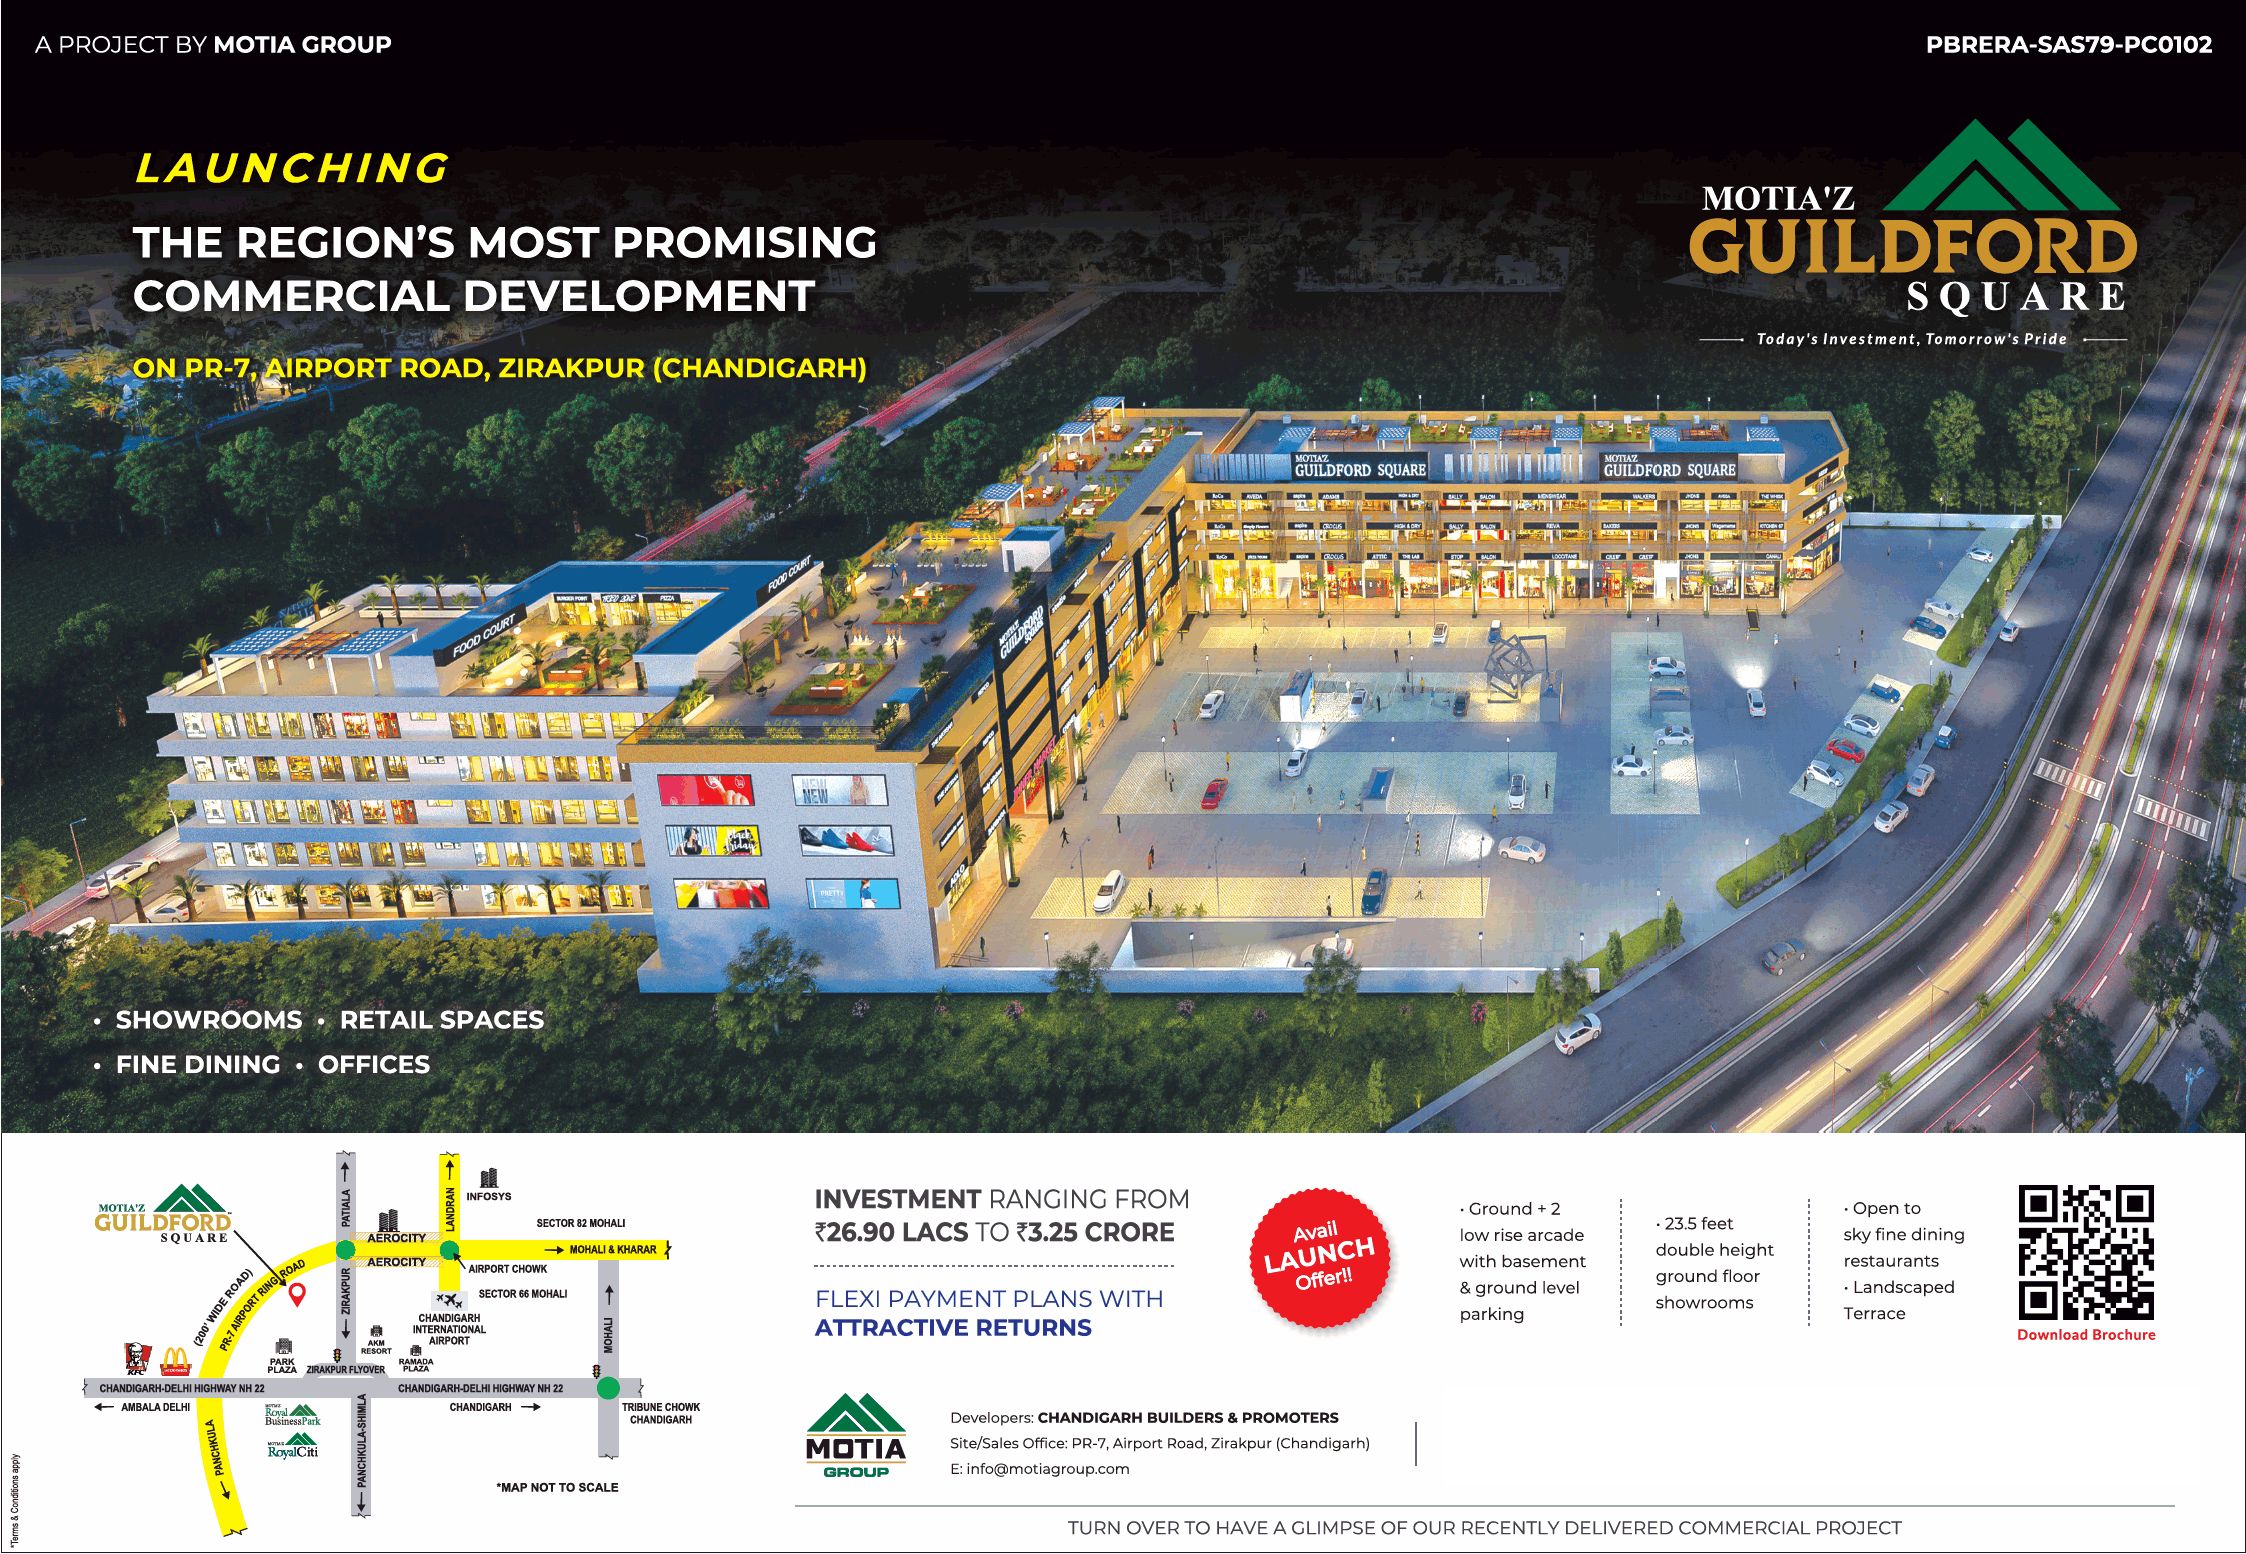 Launching the region's most promising commercial development at Motiaz Guildford Square in Zirakpur, Chandigarh Update